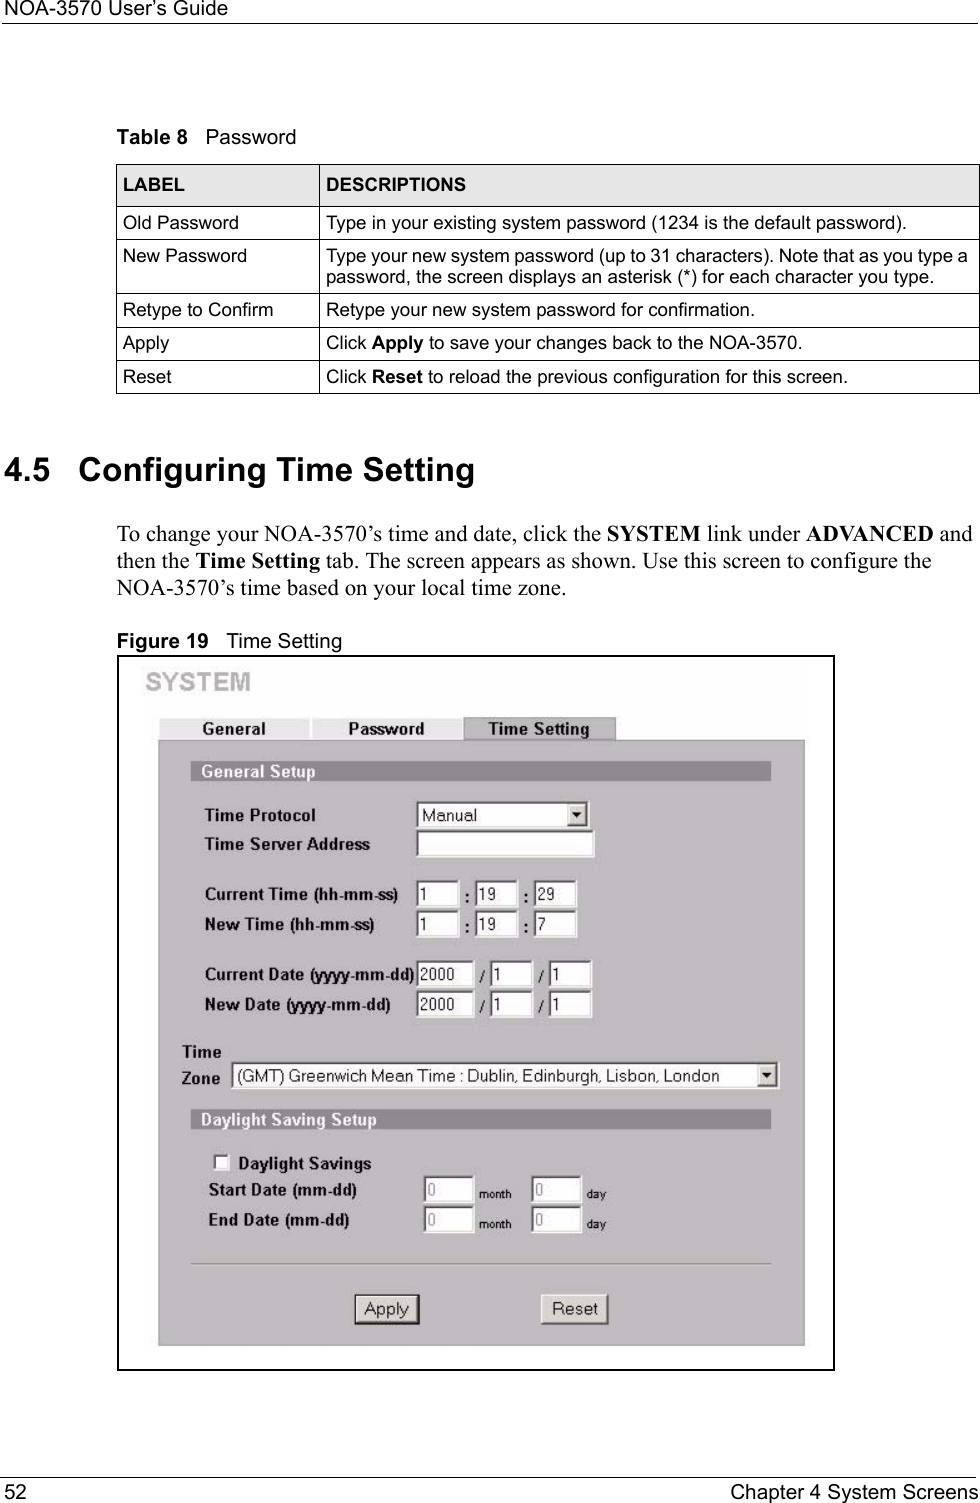 NOA-3570 User’s Guide52 Chapter 4 System Screens4.5   Configuring Time SettingTo change your NOA-3570’s time and date, click the SYSTEM link under ADVANCED and then the Time Setting tab. The screen appears as shown. Use this screen to configure the NOA-3570’s time based on your local time zone.Figure 19   Time SettingTable 8   PasswordLABEL DESCRIPTIONSOld Password Type in your existing system password (1234 is the default password).New Password Type your new system password (up to 31 characters). Note that as you type a password, the screen displays an asterisk (*) for each character you type.Retype to Confirm Retype your new system password for confirmation.Apply Click Apply to save your changes back to the NOA-3570.Reset Click Reset to reload the previous configuration for this screen.